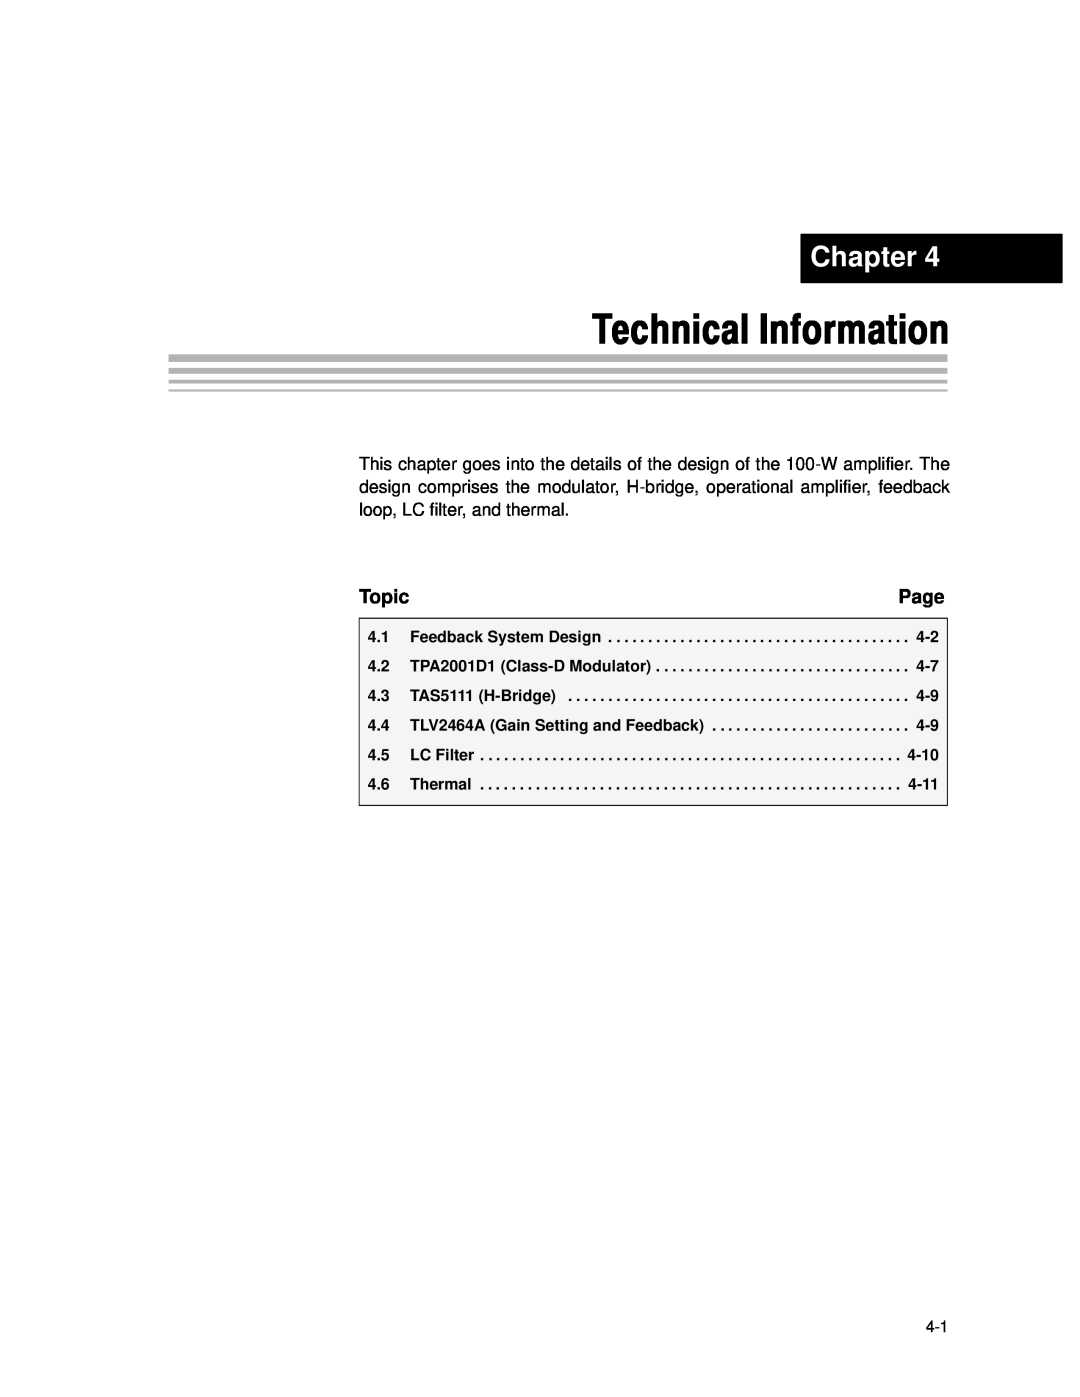 Texas Instruments APA100 manual Technical Information, Chapter, Page, Topic 